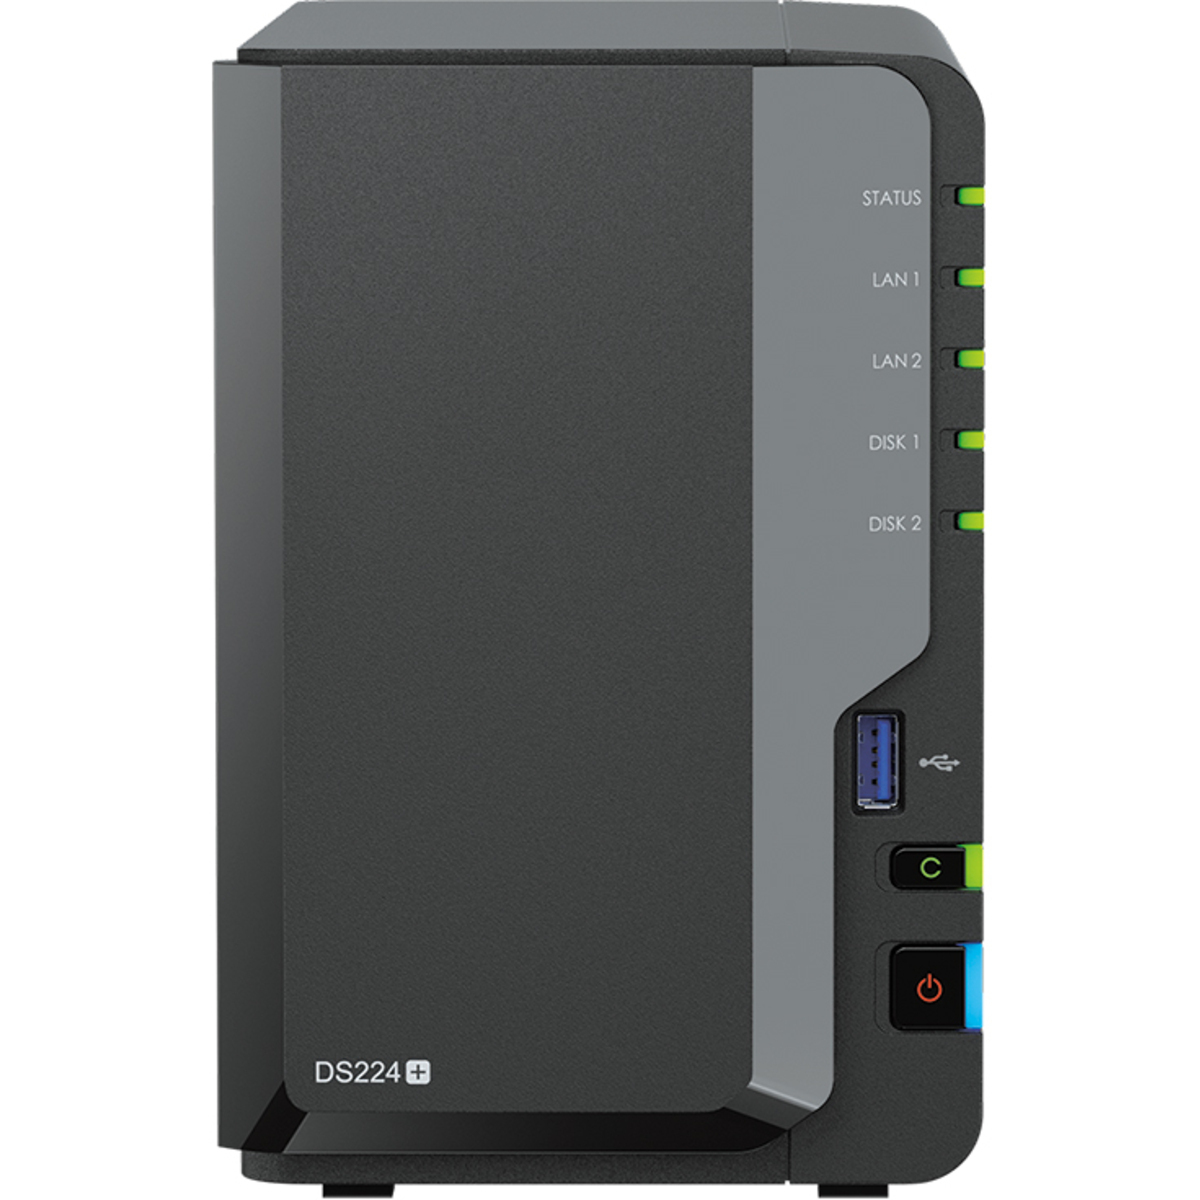 buy Synology DiskStation DS224+ 8tb Desktop NAS - Network Attached Storage Device 2x4000gb Seagate BarraCuda ST4000DM004 3.5 7200rpm SATA 6Gb/s HDD CONSUMER Class Drives Installed - Burn-In Tested - ON SALE - FREE RAM UPGRADE - nas headquarters buy network attached storage server device das new raid-5 free shipping simply usa DiskStation DS224+